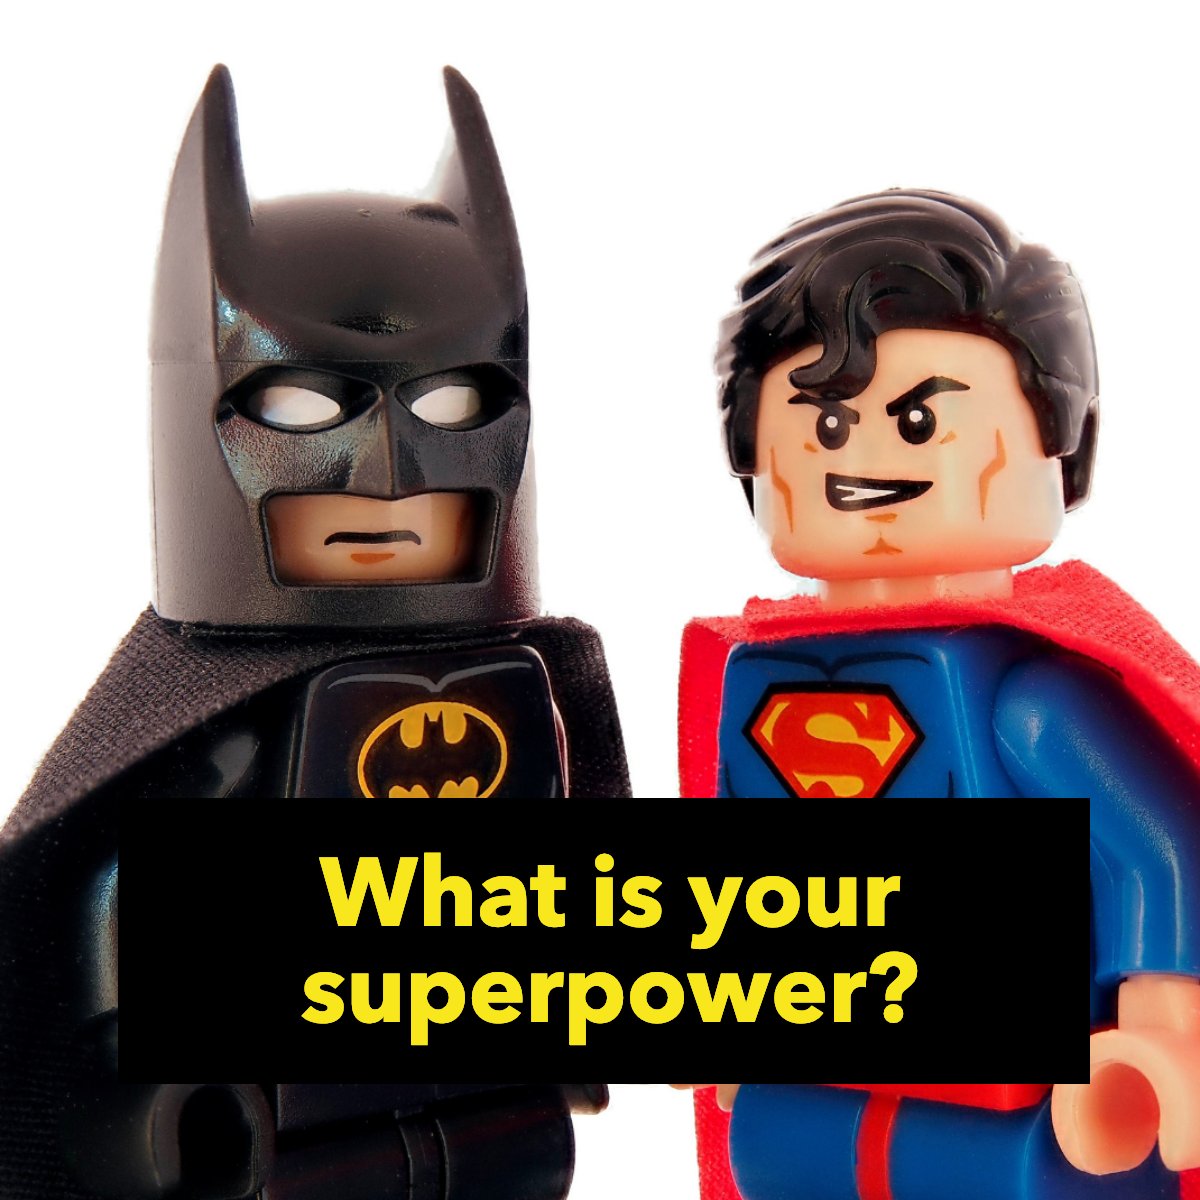 Does eating an entire pizza in one sitting count? 🍕 😅

What is your superpower? Let us know in the comments!

#hero #superhero #lego #legos #superman #batman 
 #tampabayrealtor #SevenOakshomes #Wesleychapelhomes #Wesleychapelrealtor #tampabayrealeastate #33544